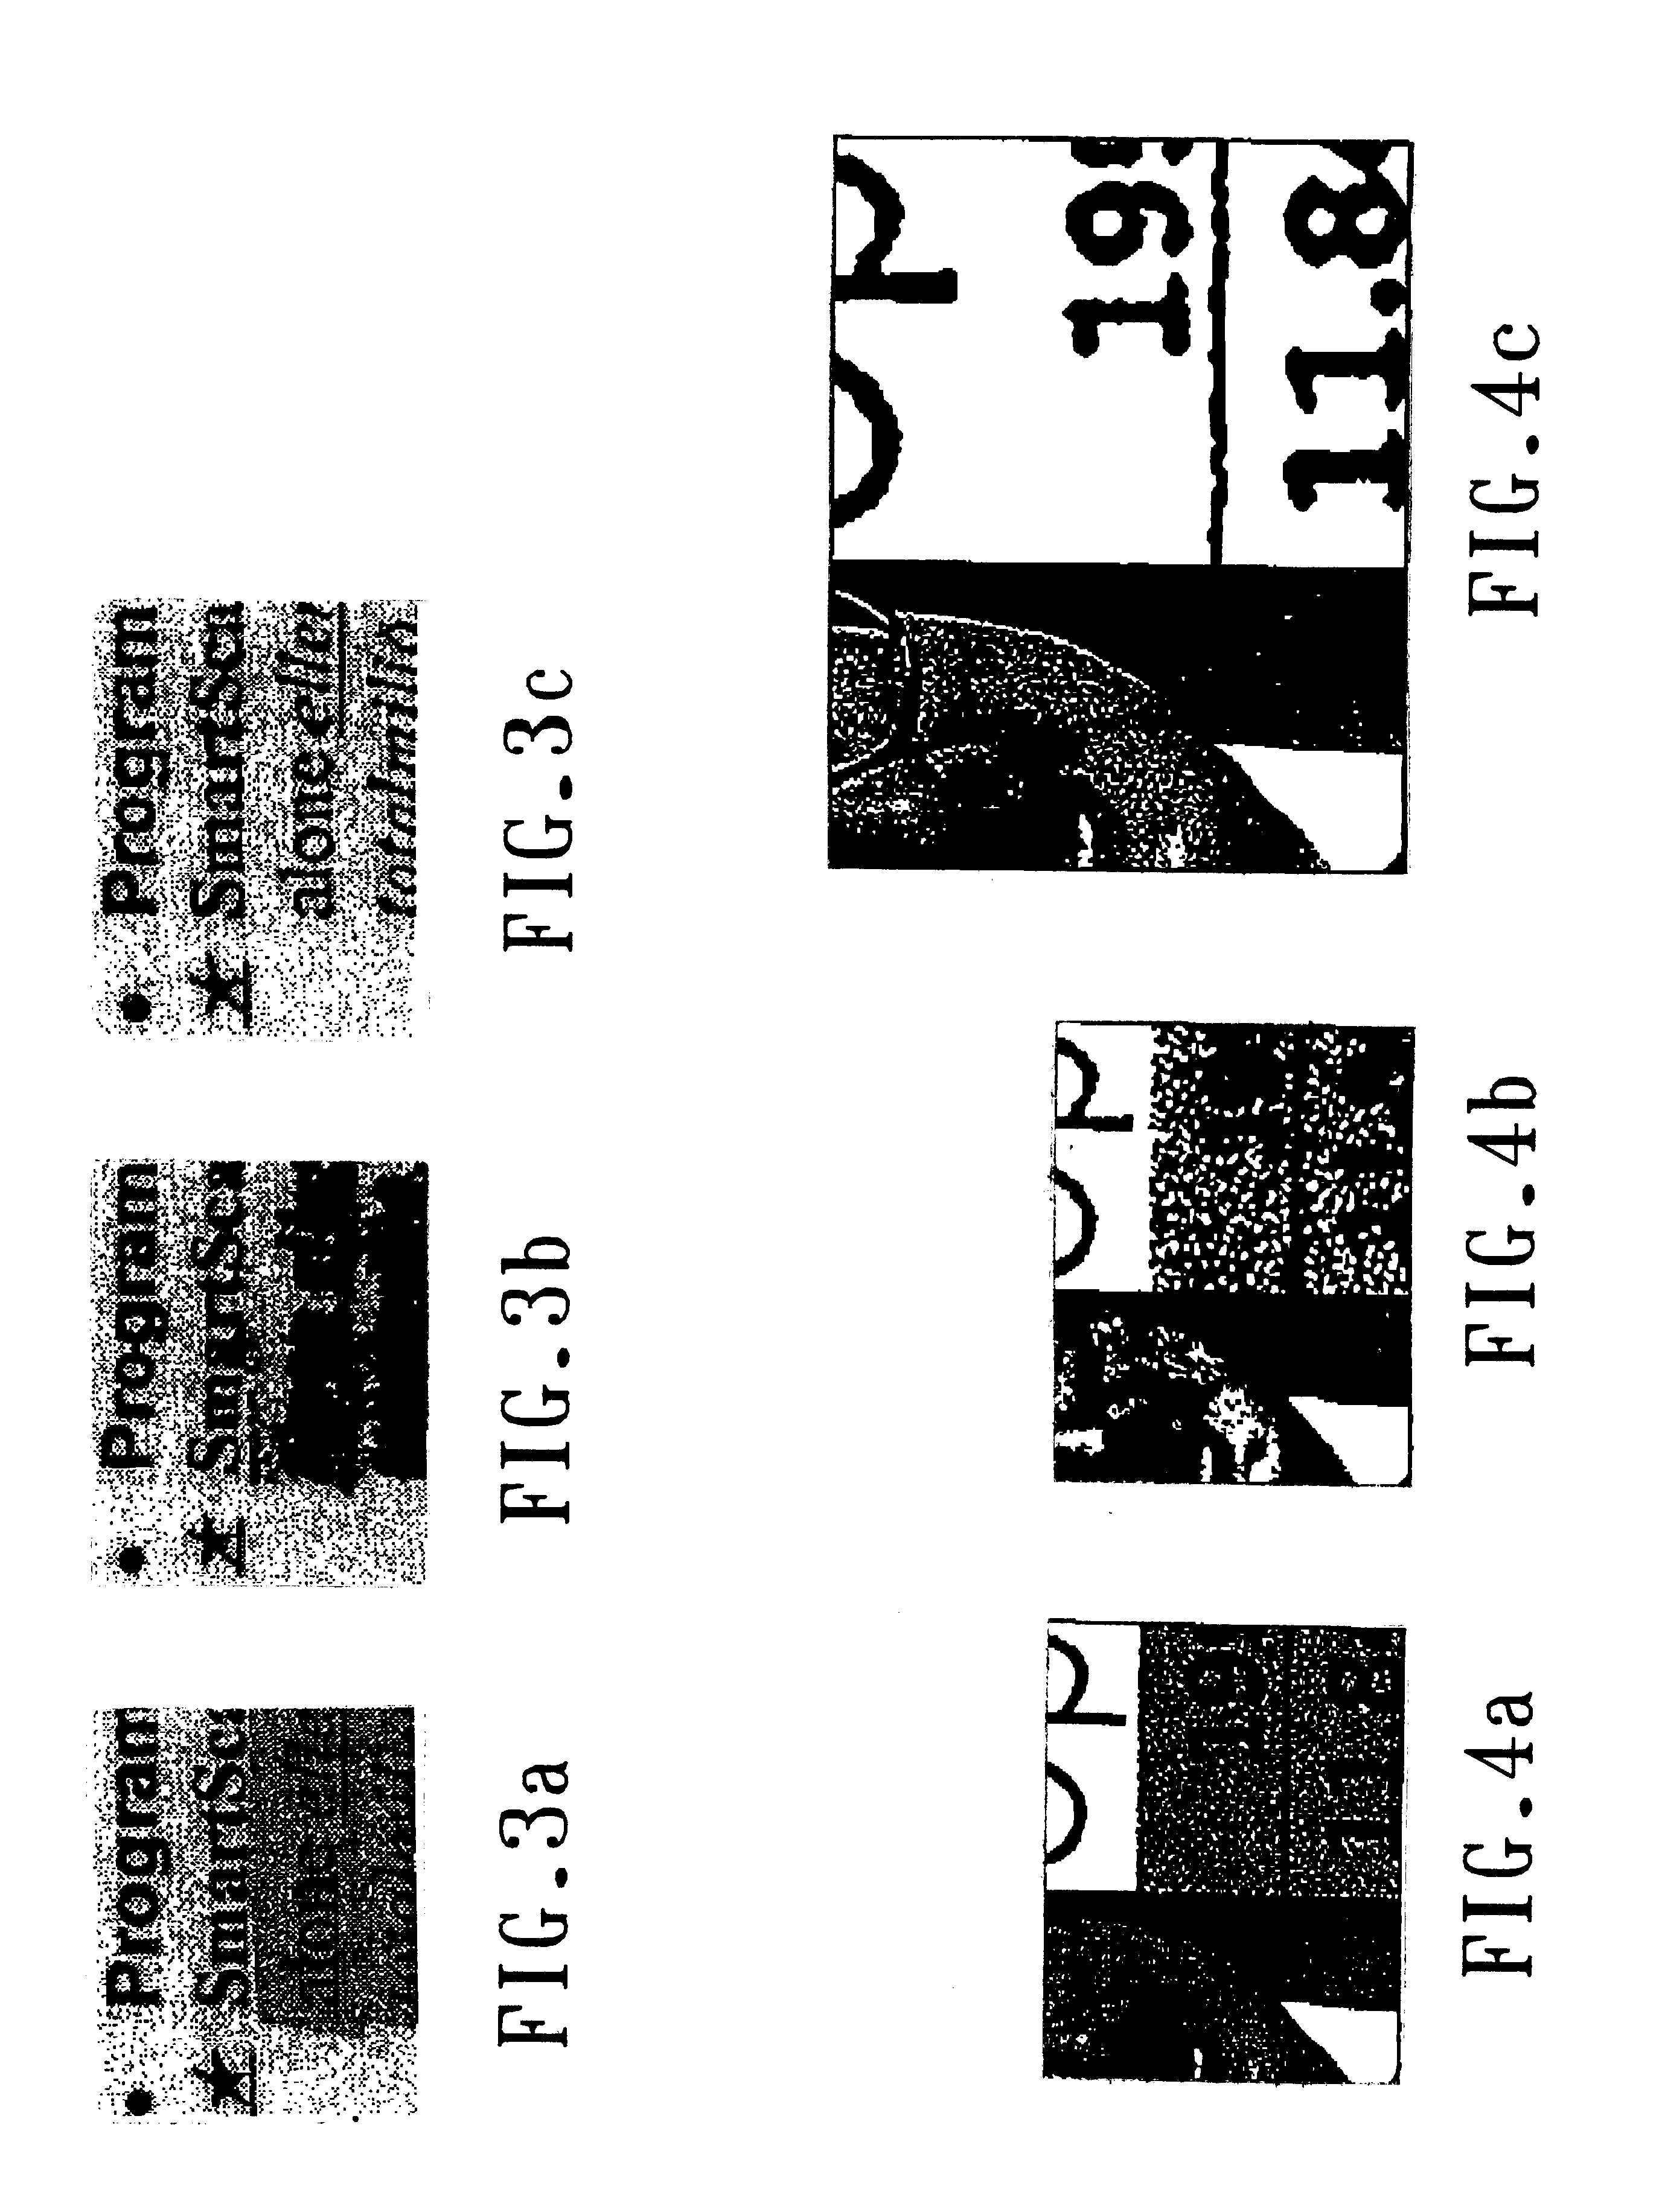 Method and arrangement for ensuring quality during scanning/copying of images/documents